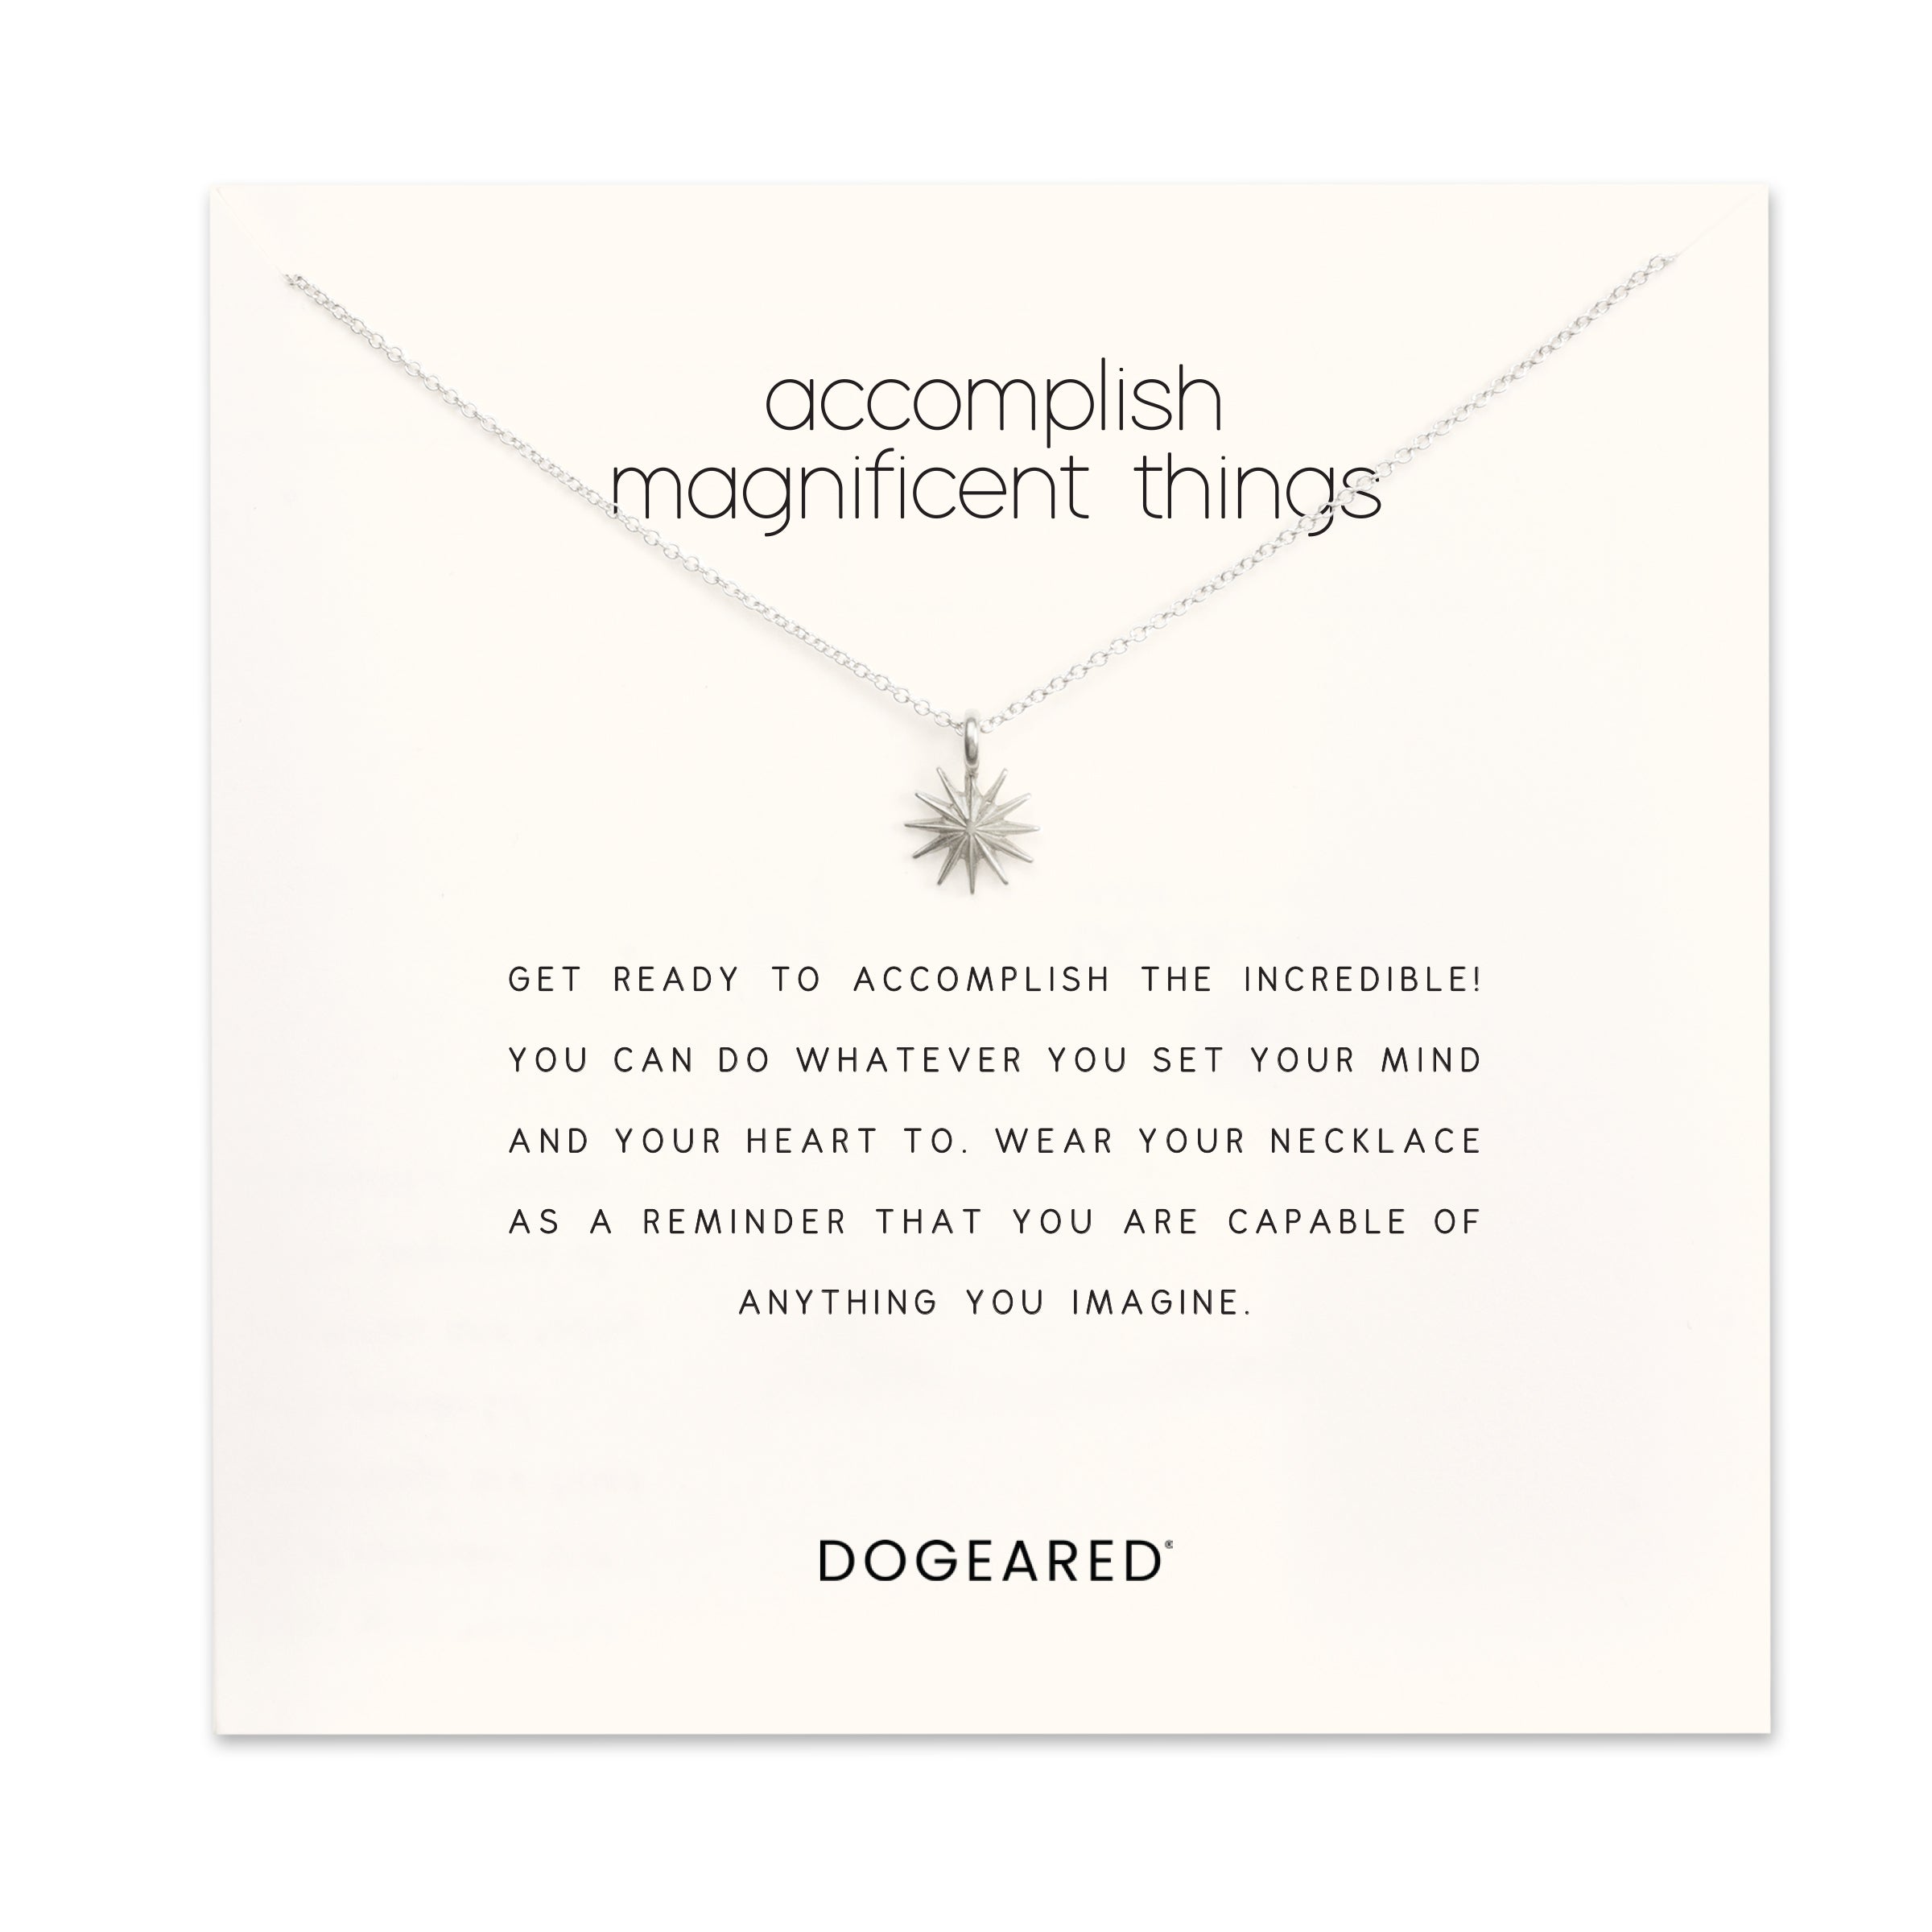 Accomplish magnificent things - Dogeared